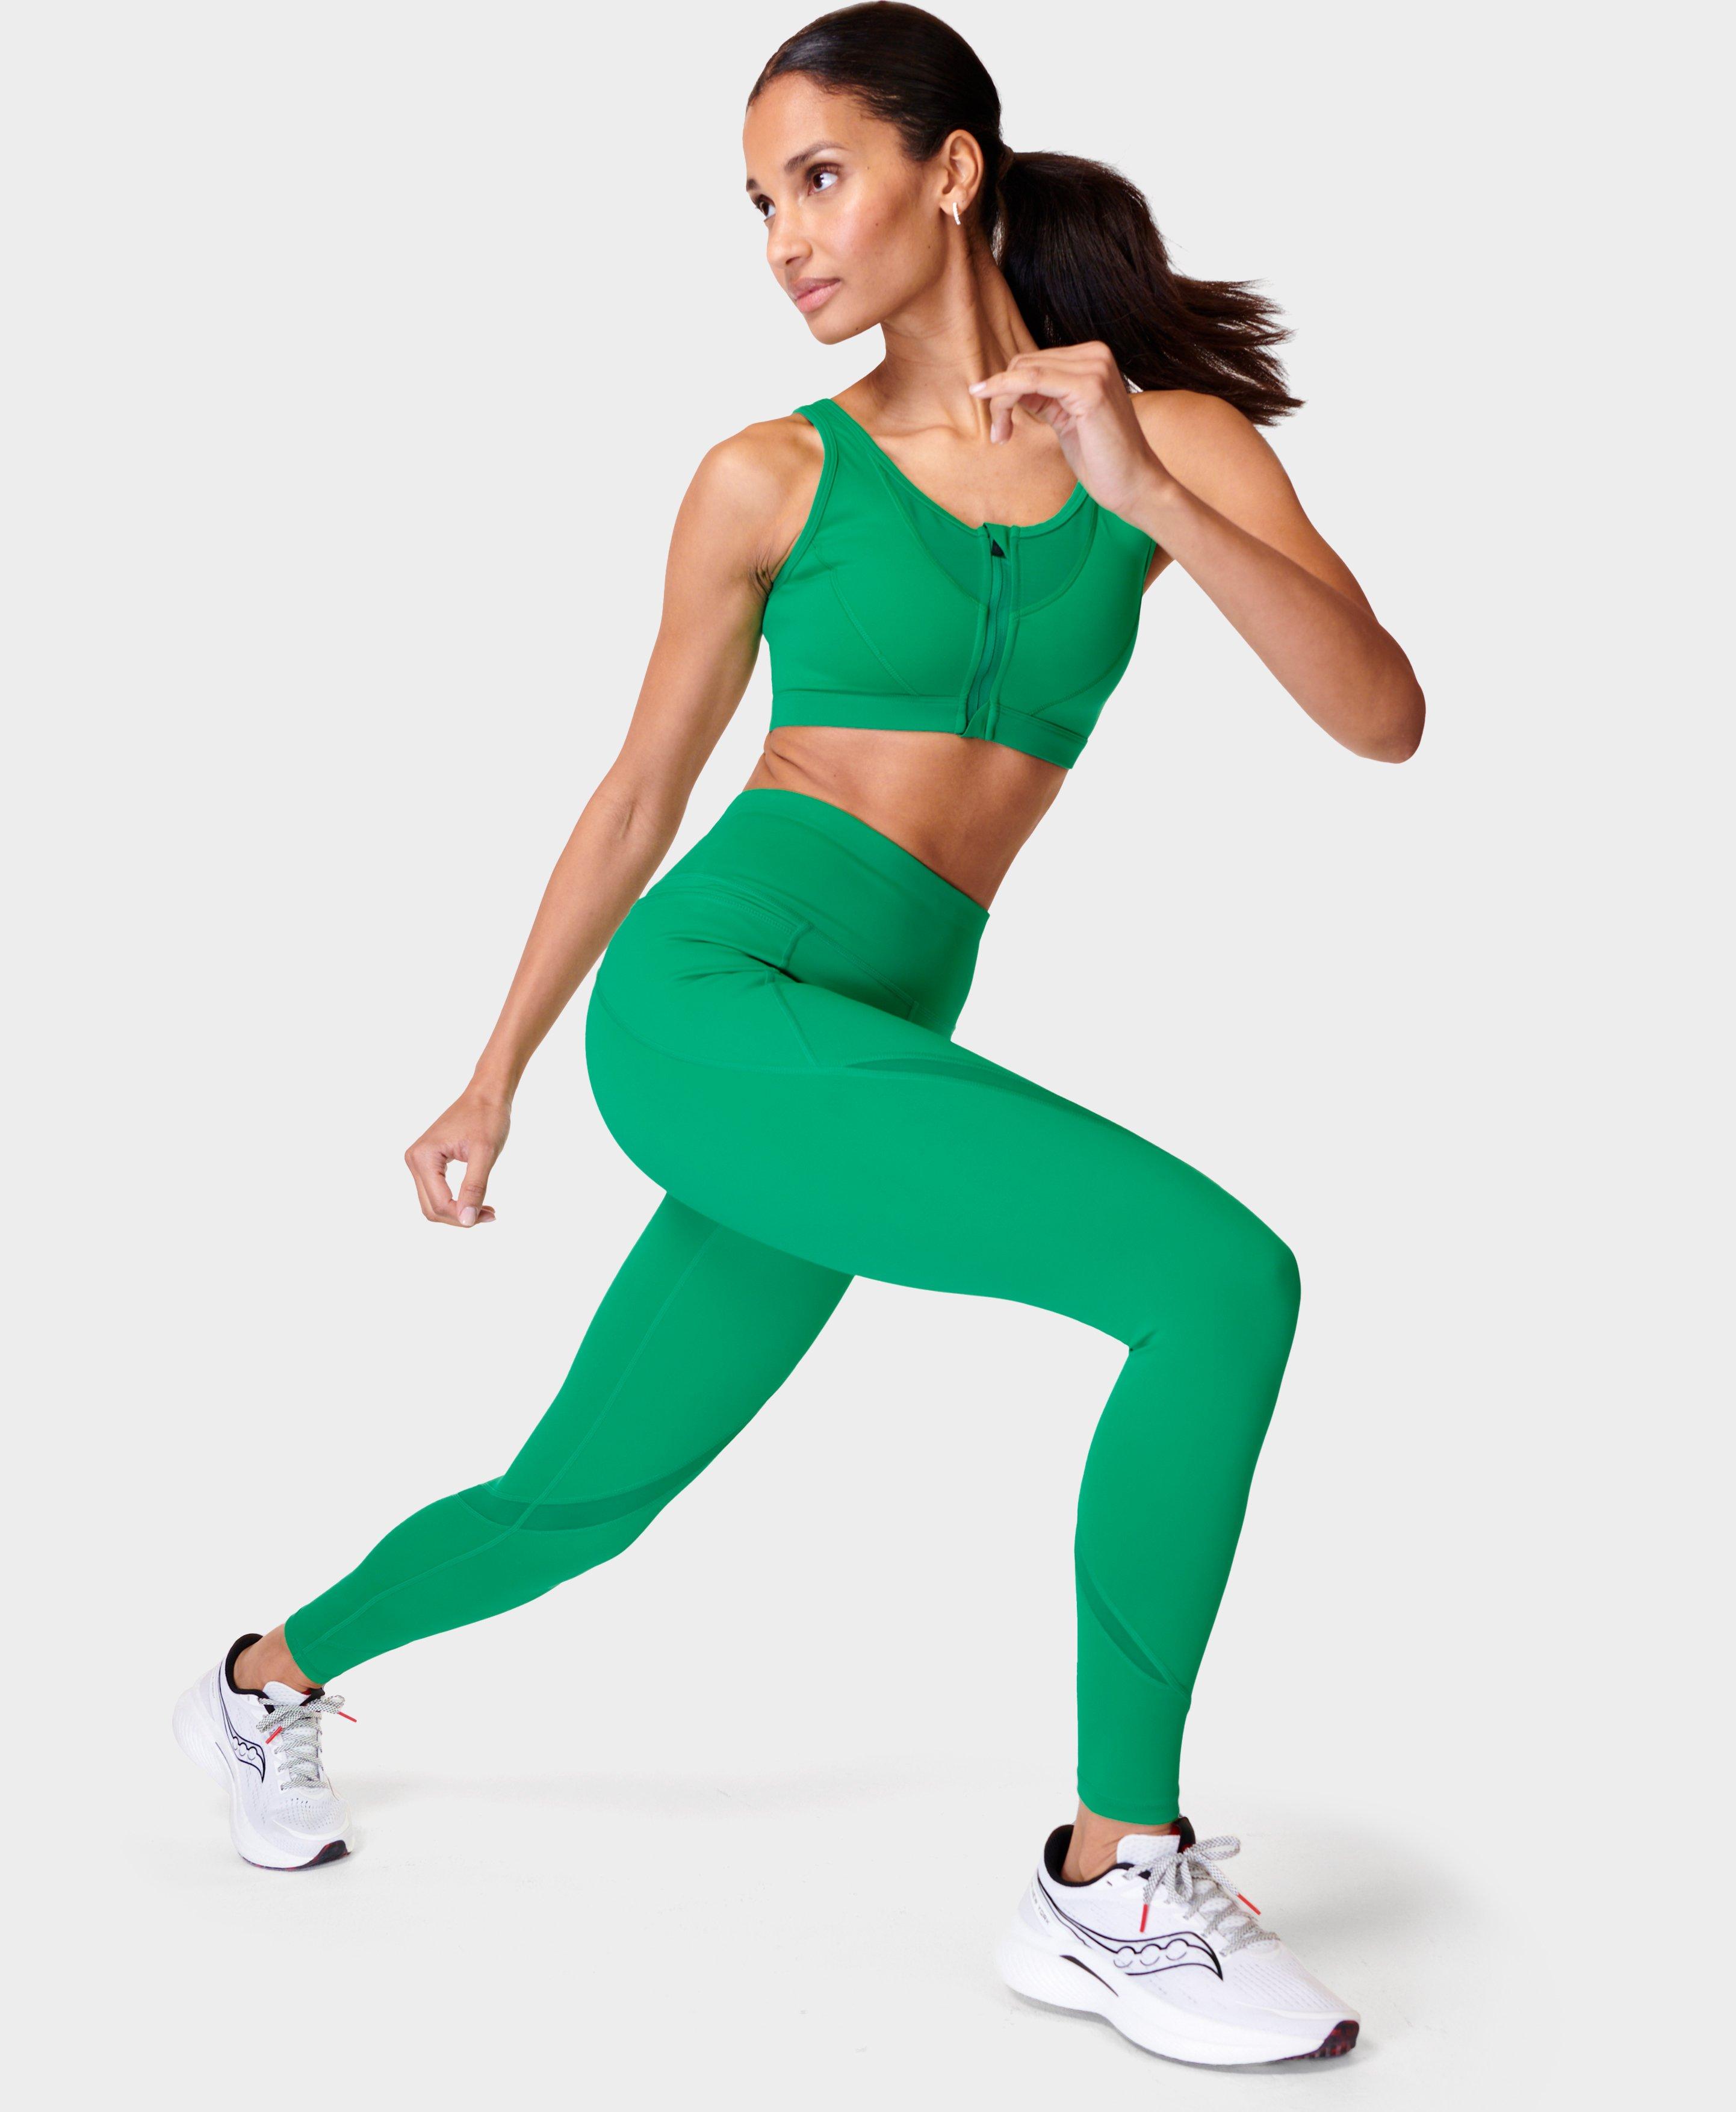 Sweaty Betty Gaia collection: Shop bras, vests, yoga pants and more